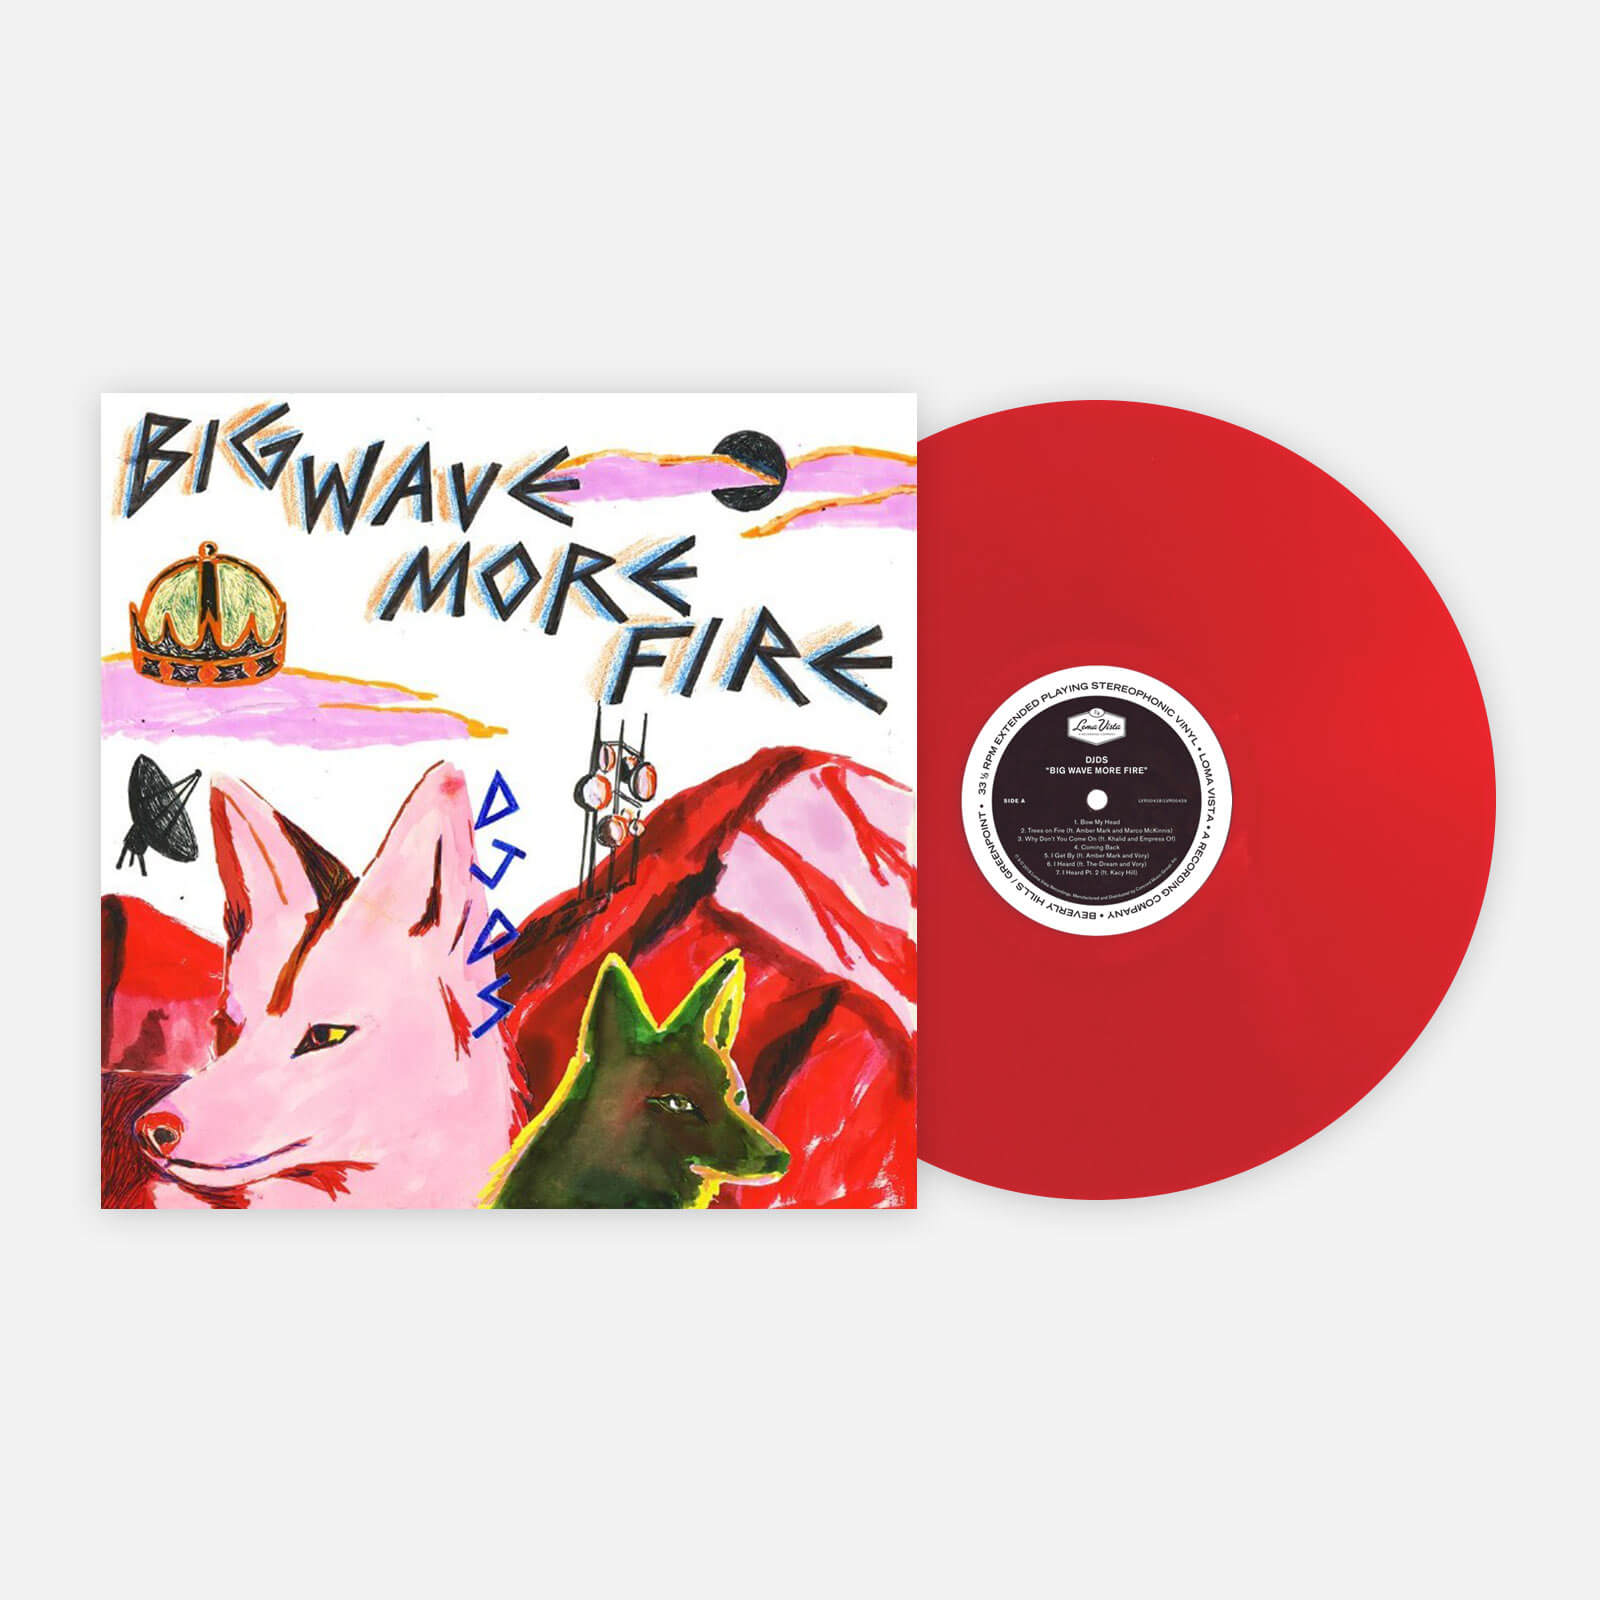 DJDS 'Big Wave More Fire' (Opaque Red Vinyl, Exclusive Incense Pack, LTD. to 600)